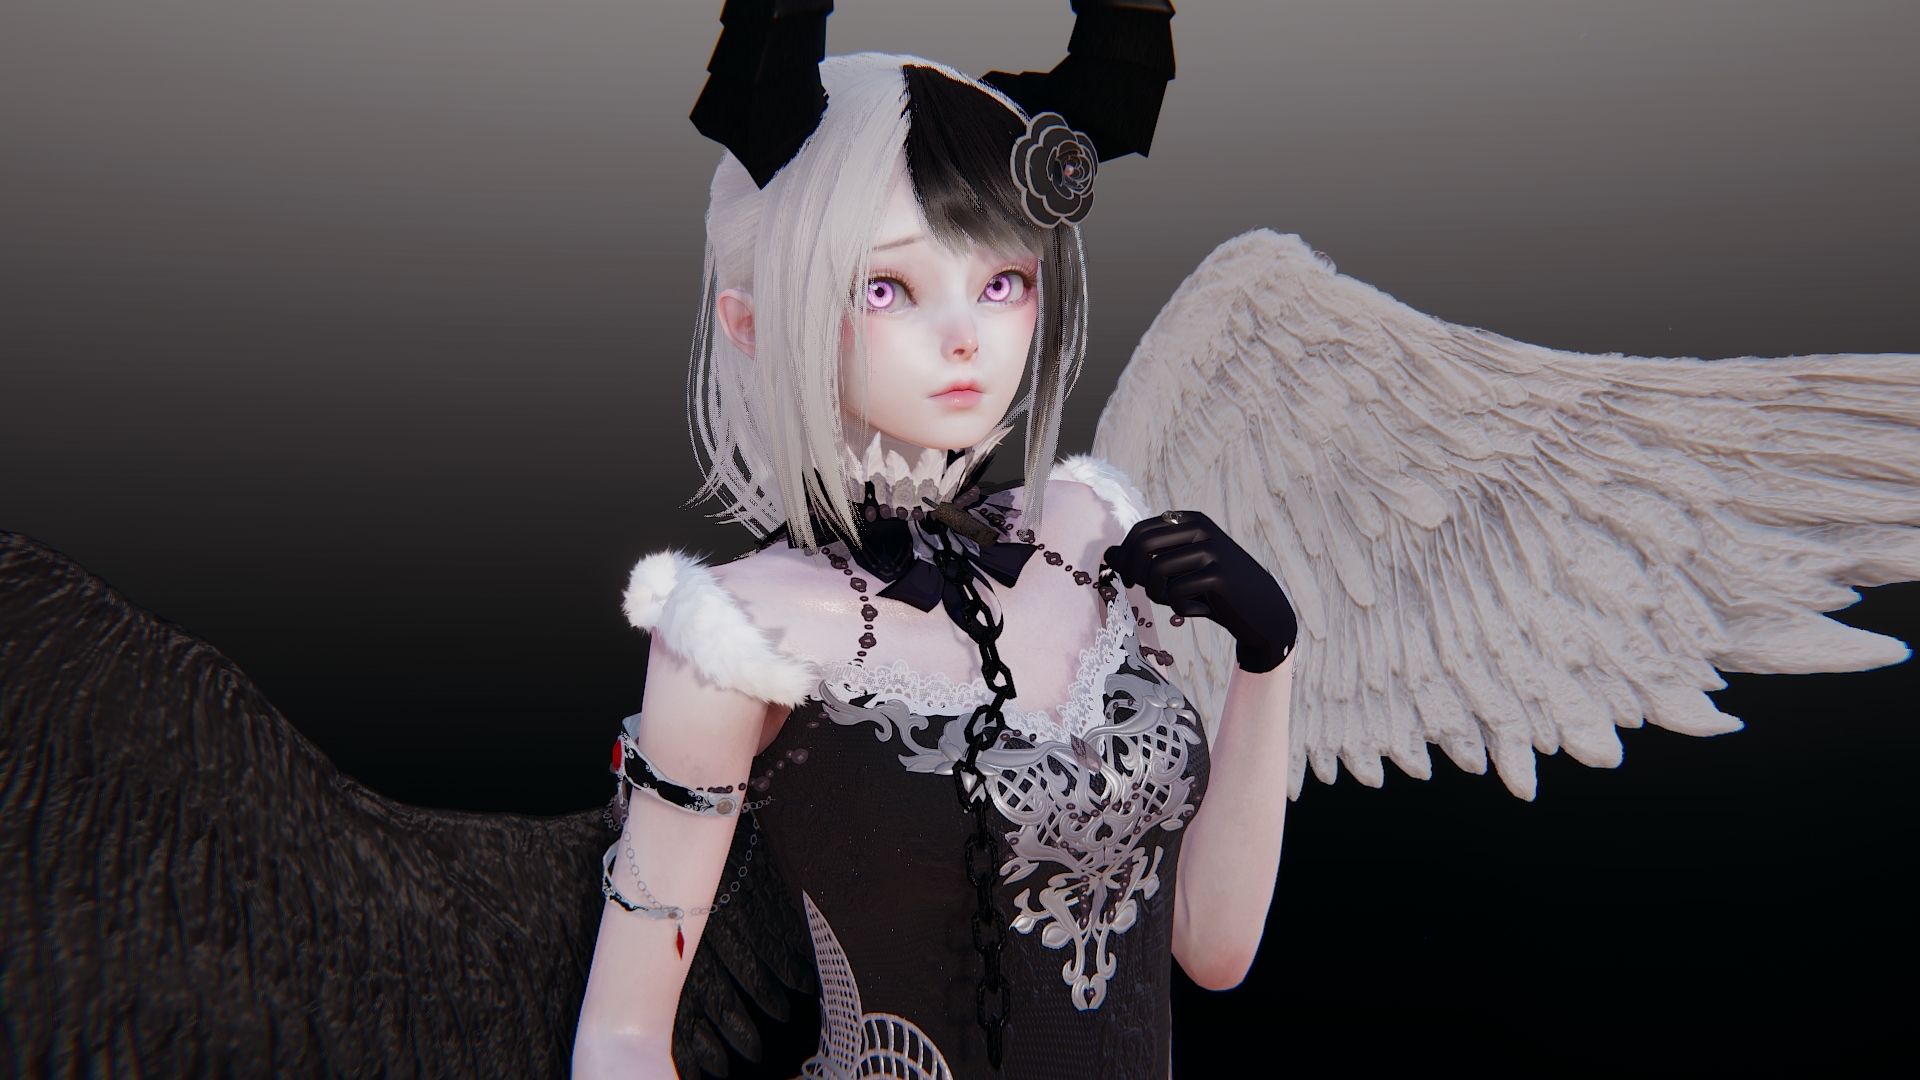 Honey Select 2 Honey Select 2 Aigirl 3d Porn Sexy Character Teen Adorable Succubus Horns Small Tits Small Ass Young Panties Fishnet Stockings 2